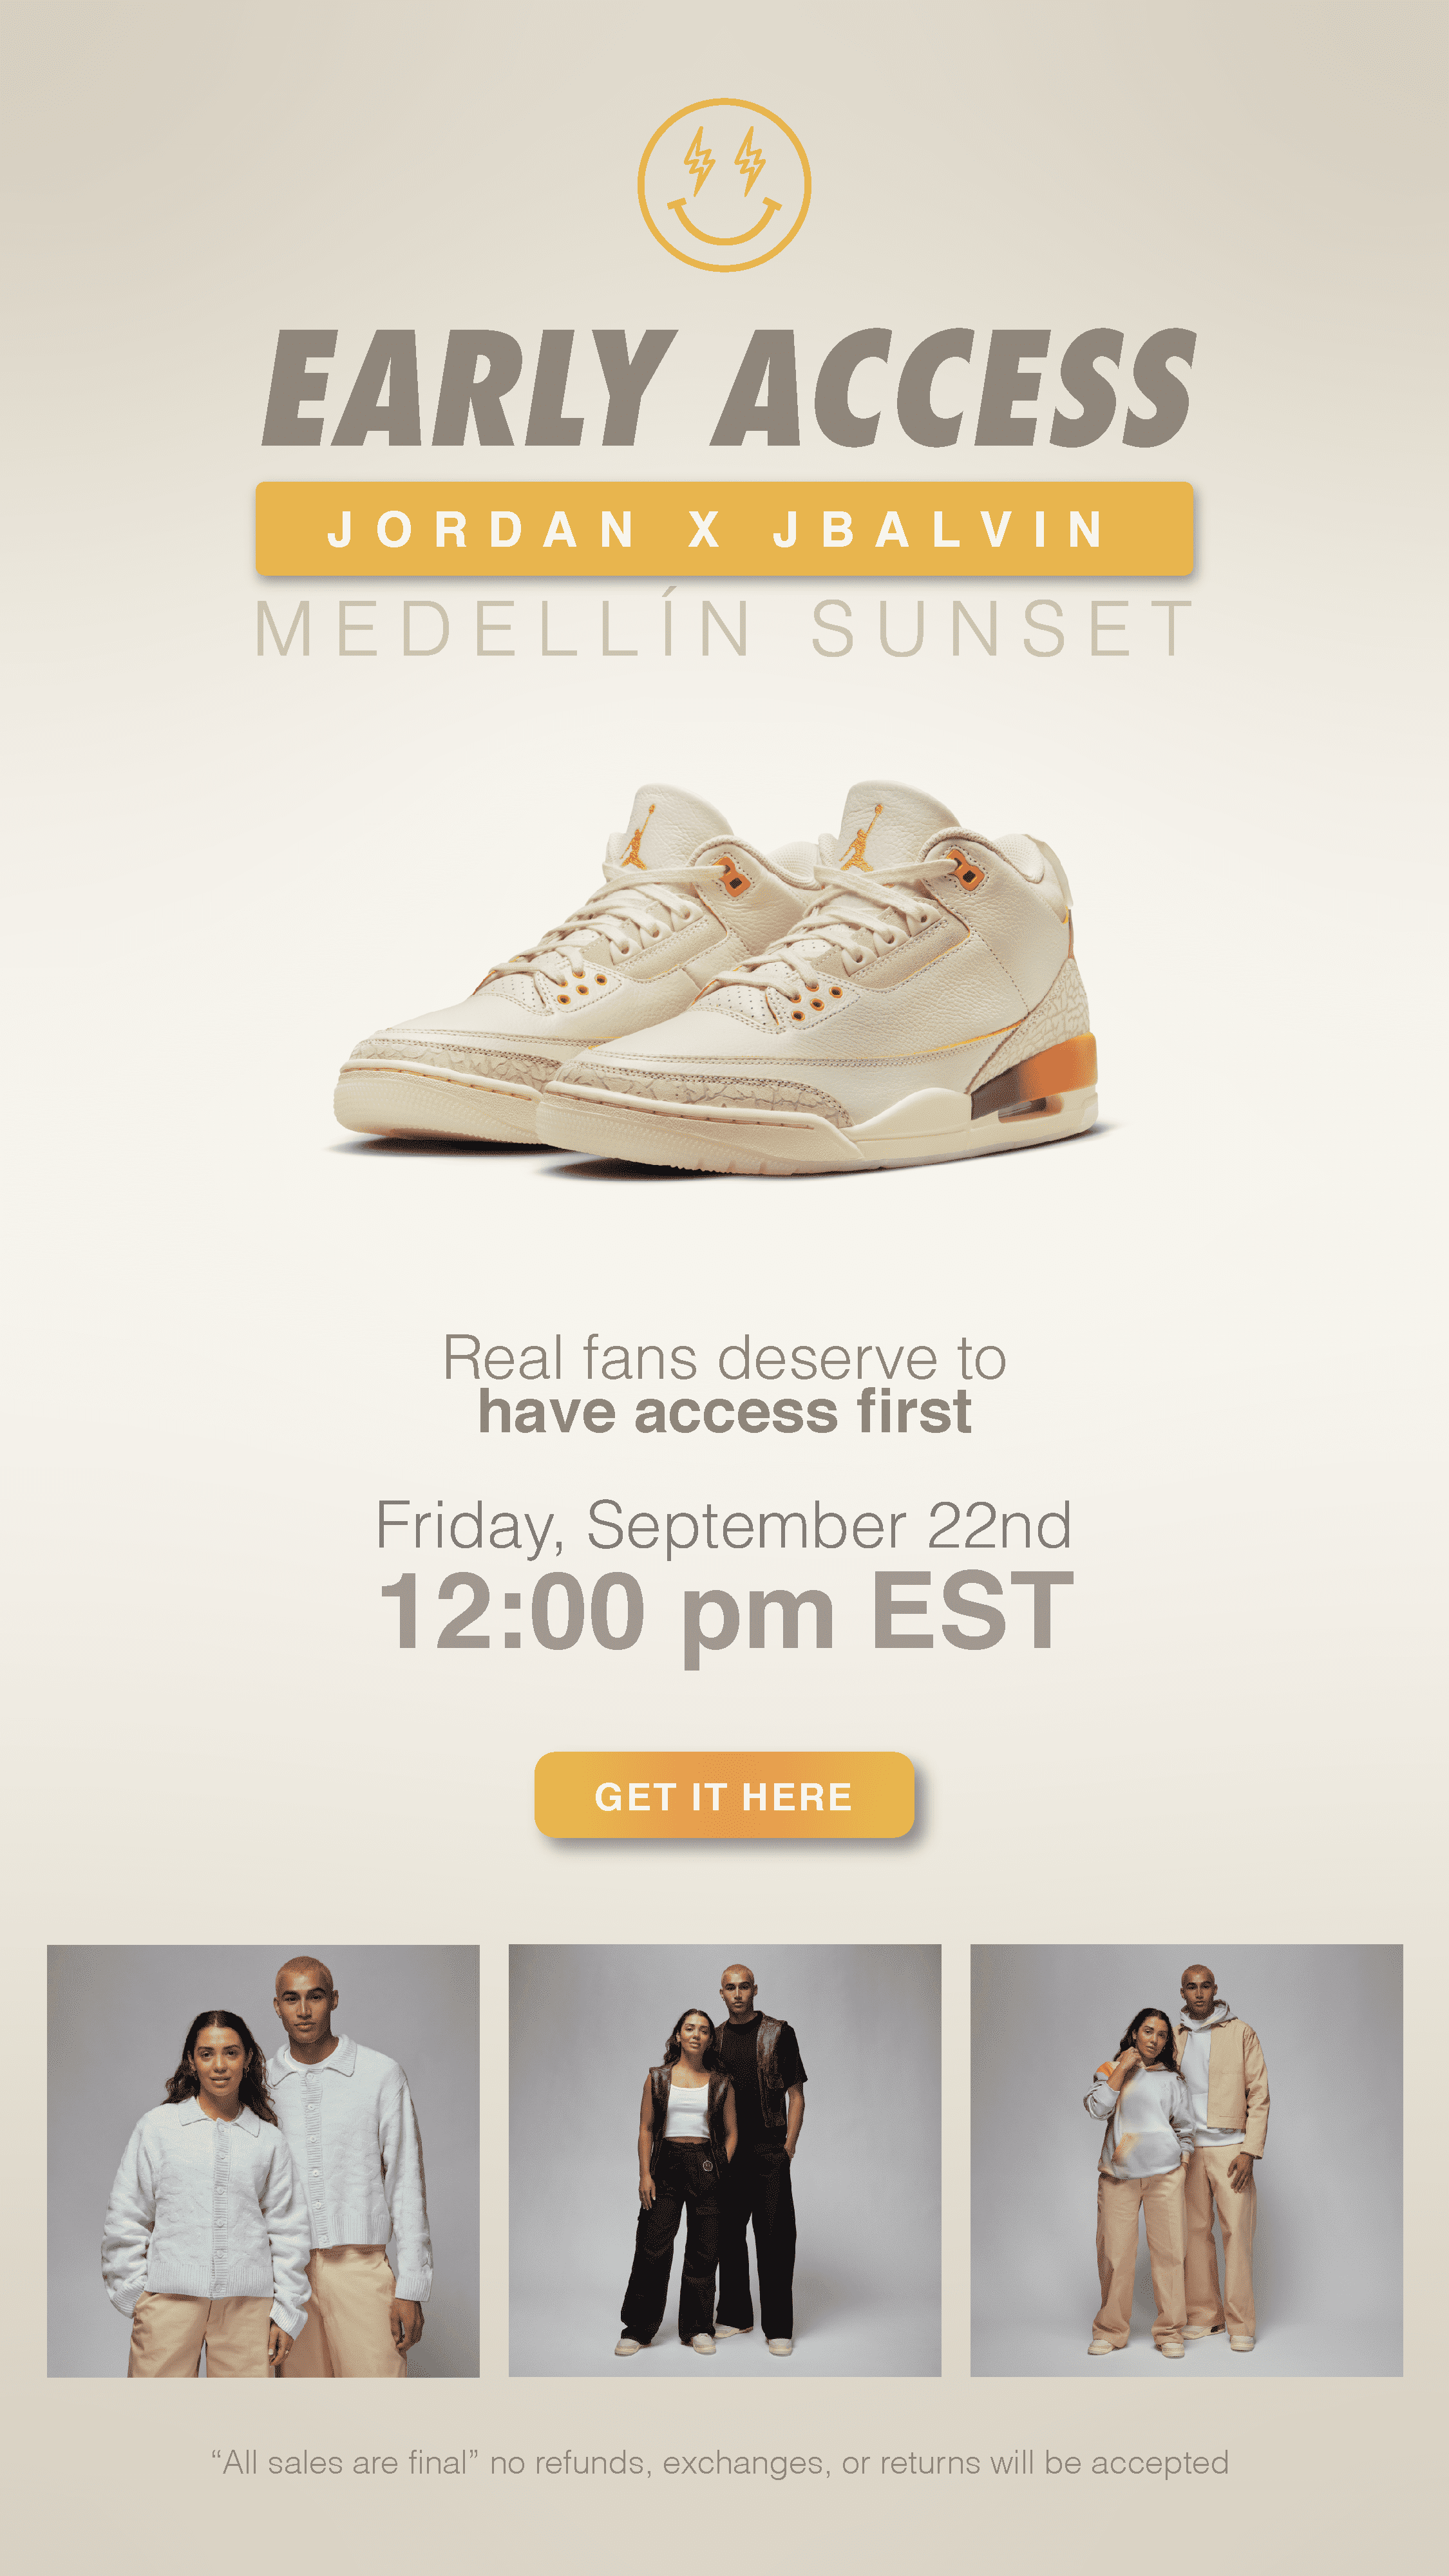 Early Access (Jordan x J. Balvin) Medellín Sunset - Real Fans Deserve to Have Access First .Get It On Friday, September 22nd, at 12:00 pm ET.